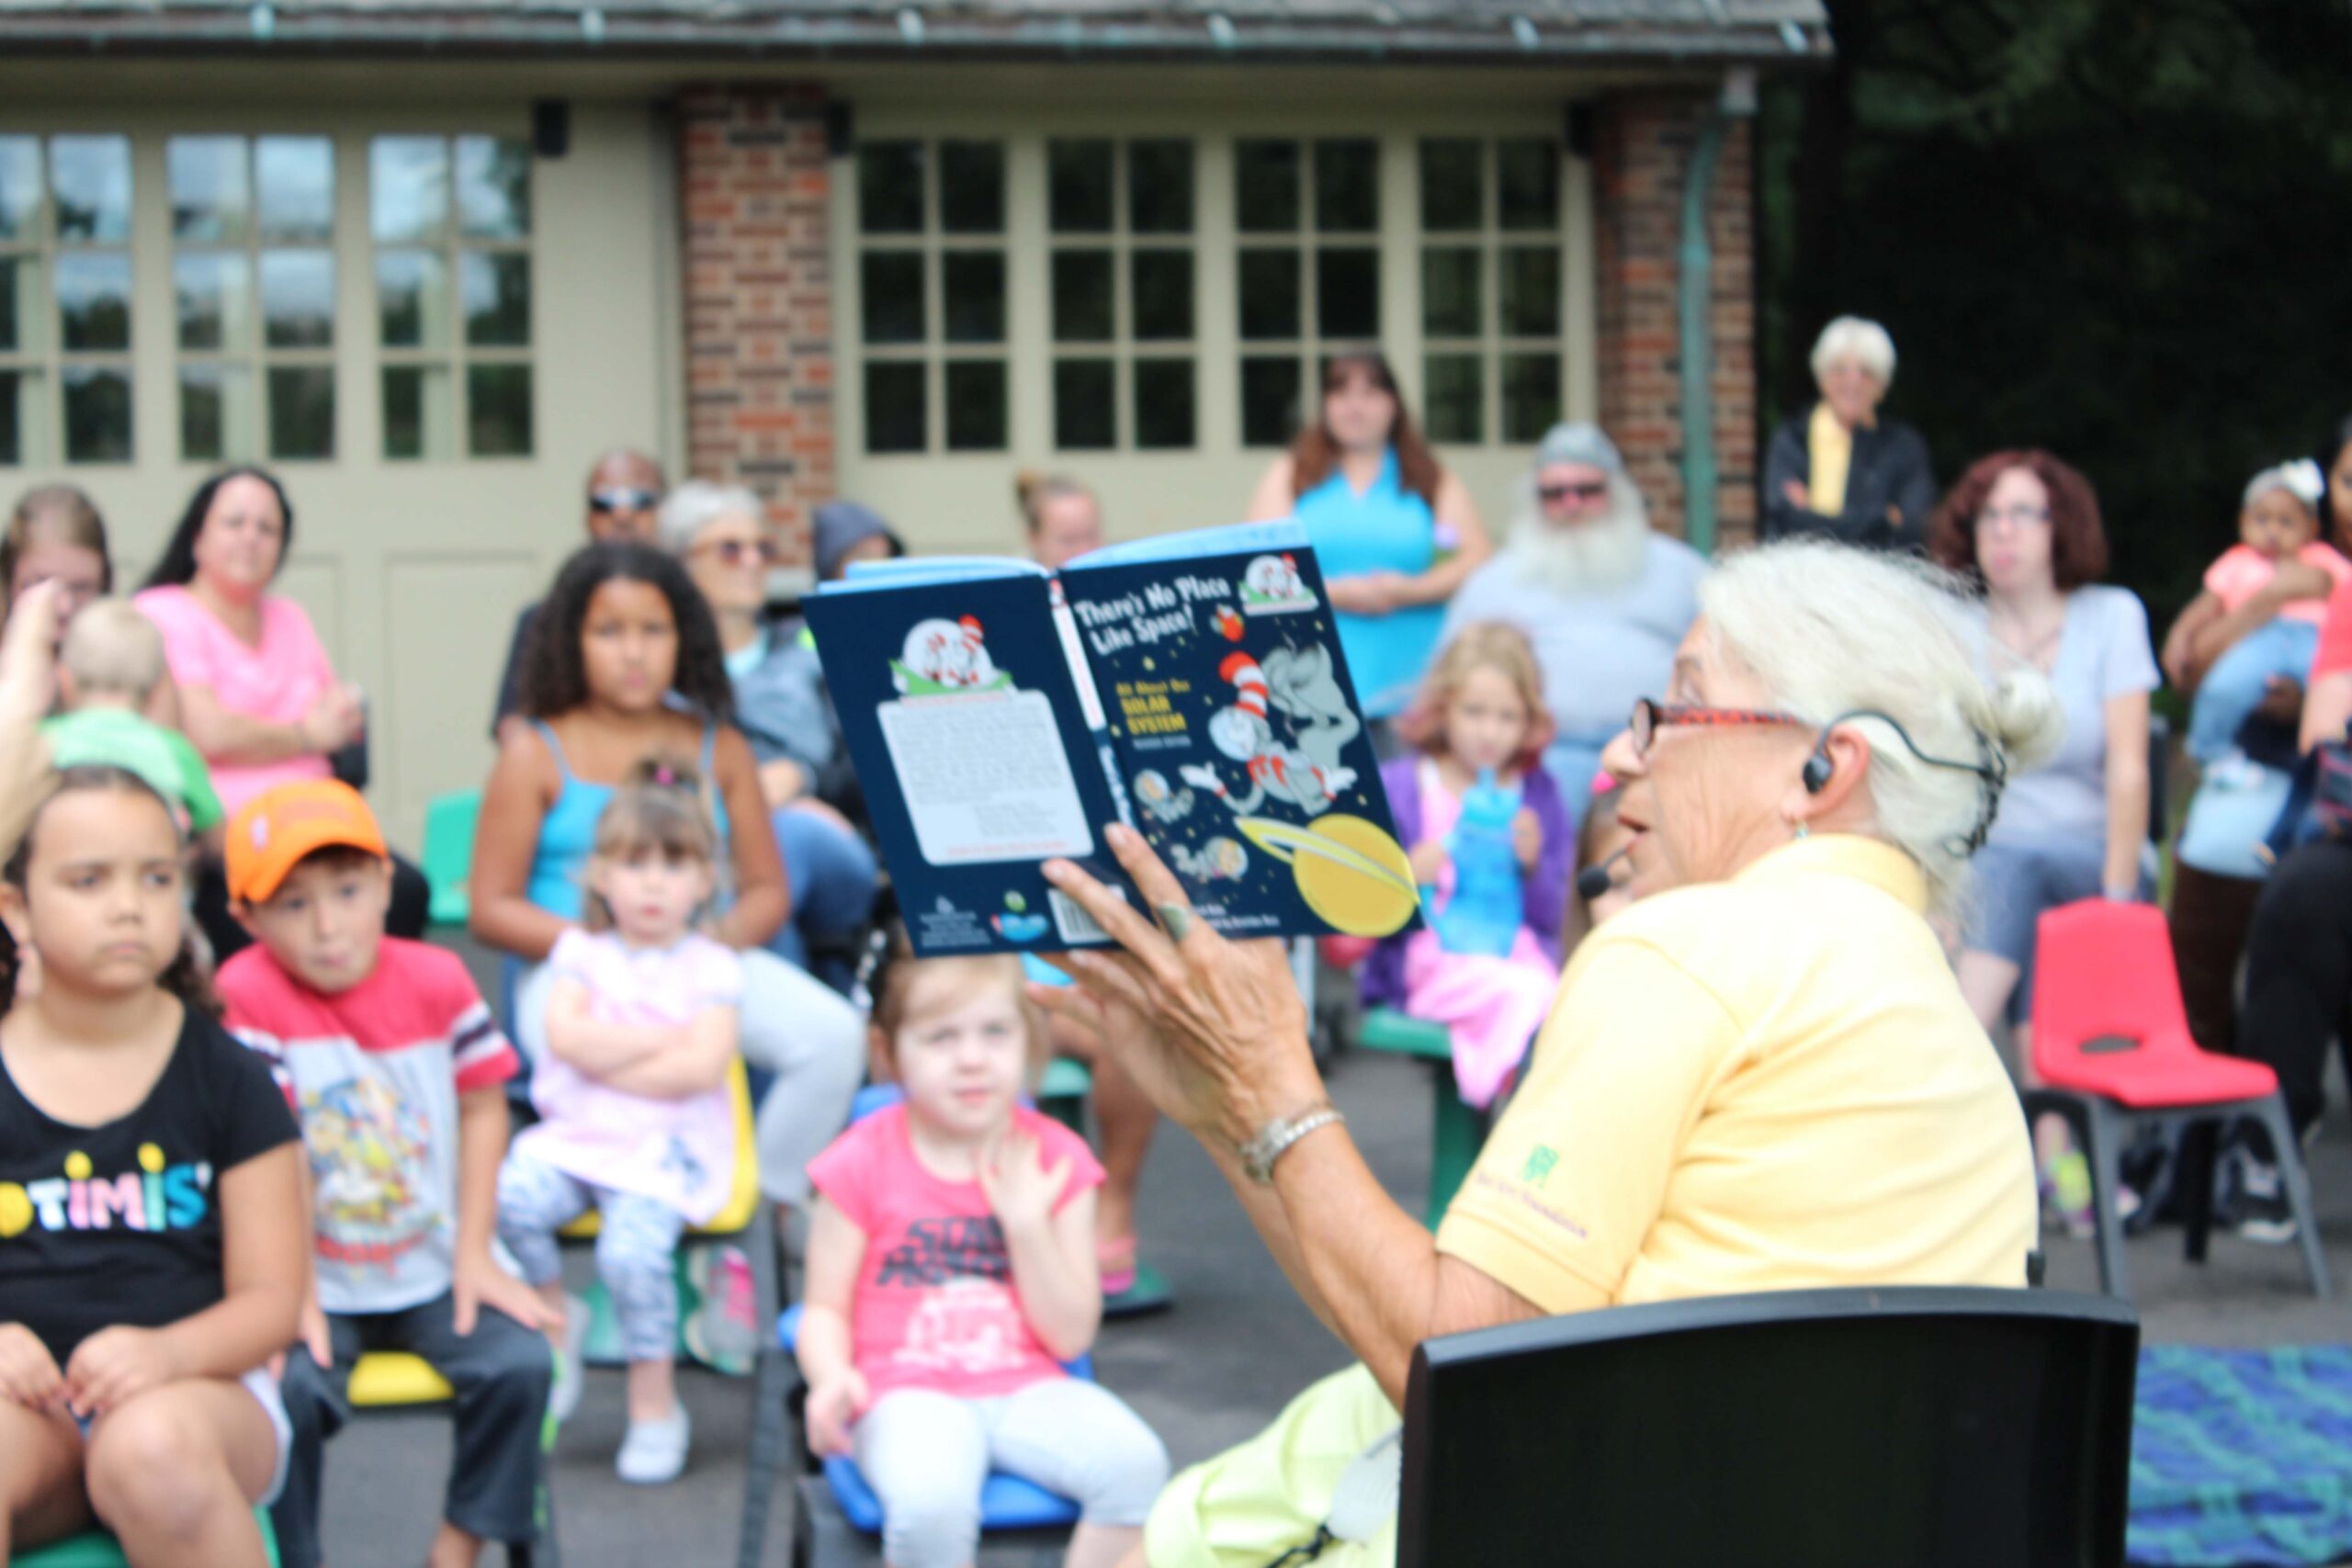 https://www.ruthmottfoundation.org/wp-content/uploads/2021/06/a-woman-reading-a-dr-seuss-book-at-storytime-at-applewood-scaled.jpg